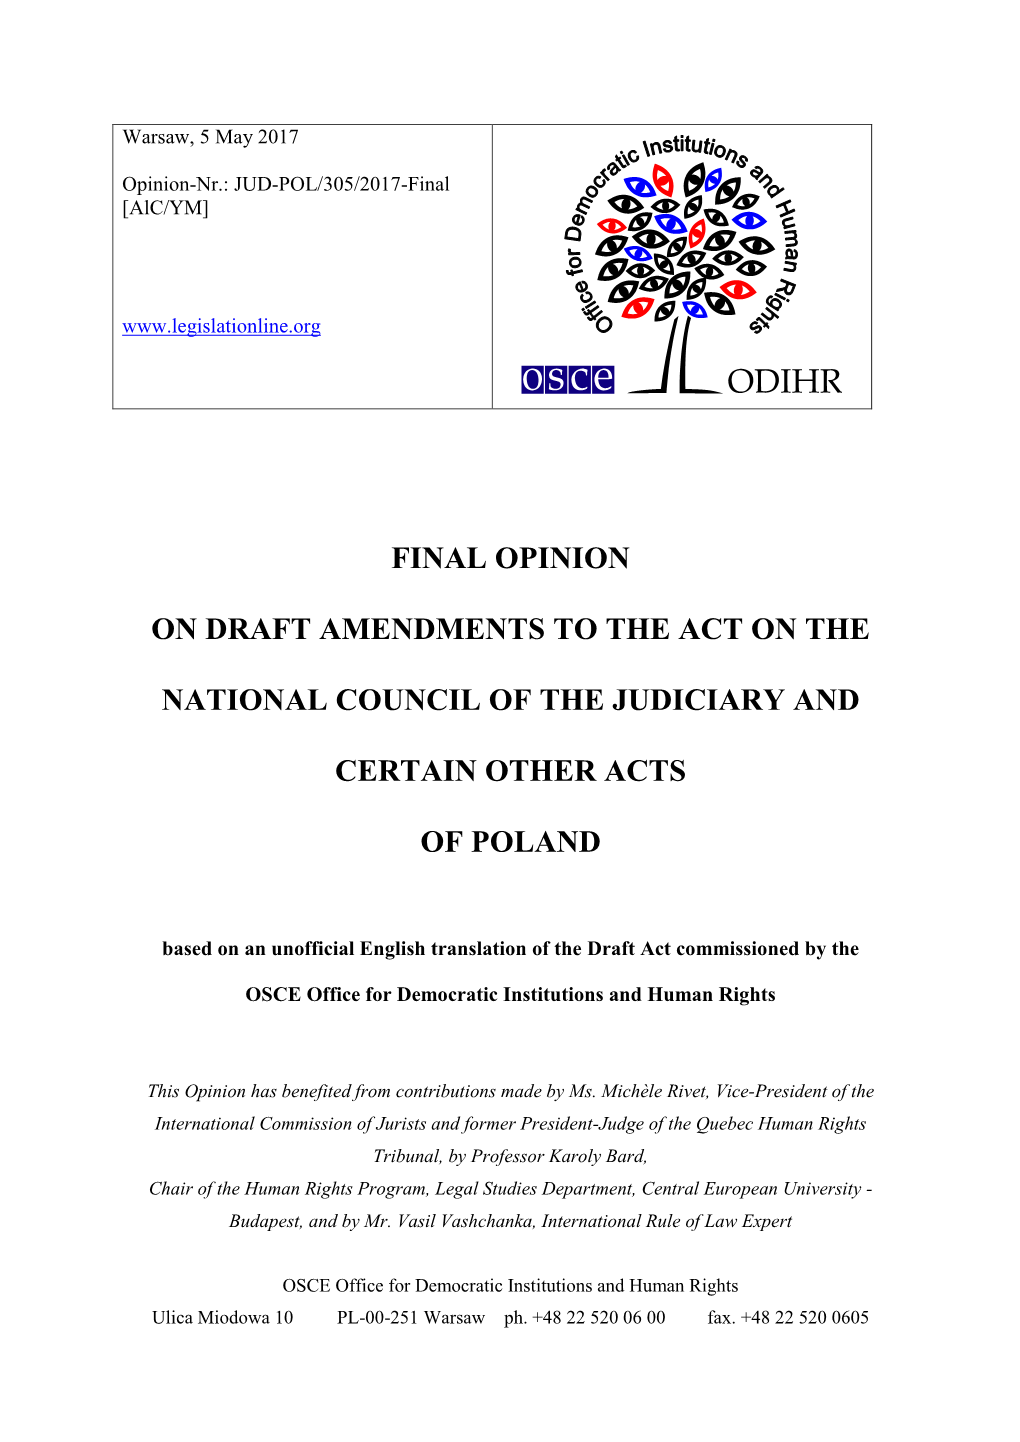 Final Opinion on Draft Amendments to the Act on the National Council of the Judiciary and Certain Other Acts of Poland